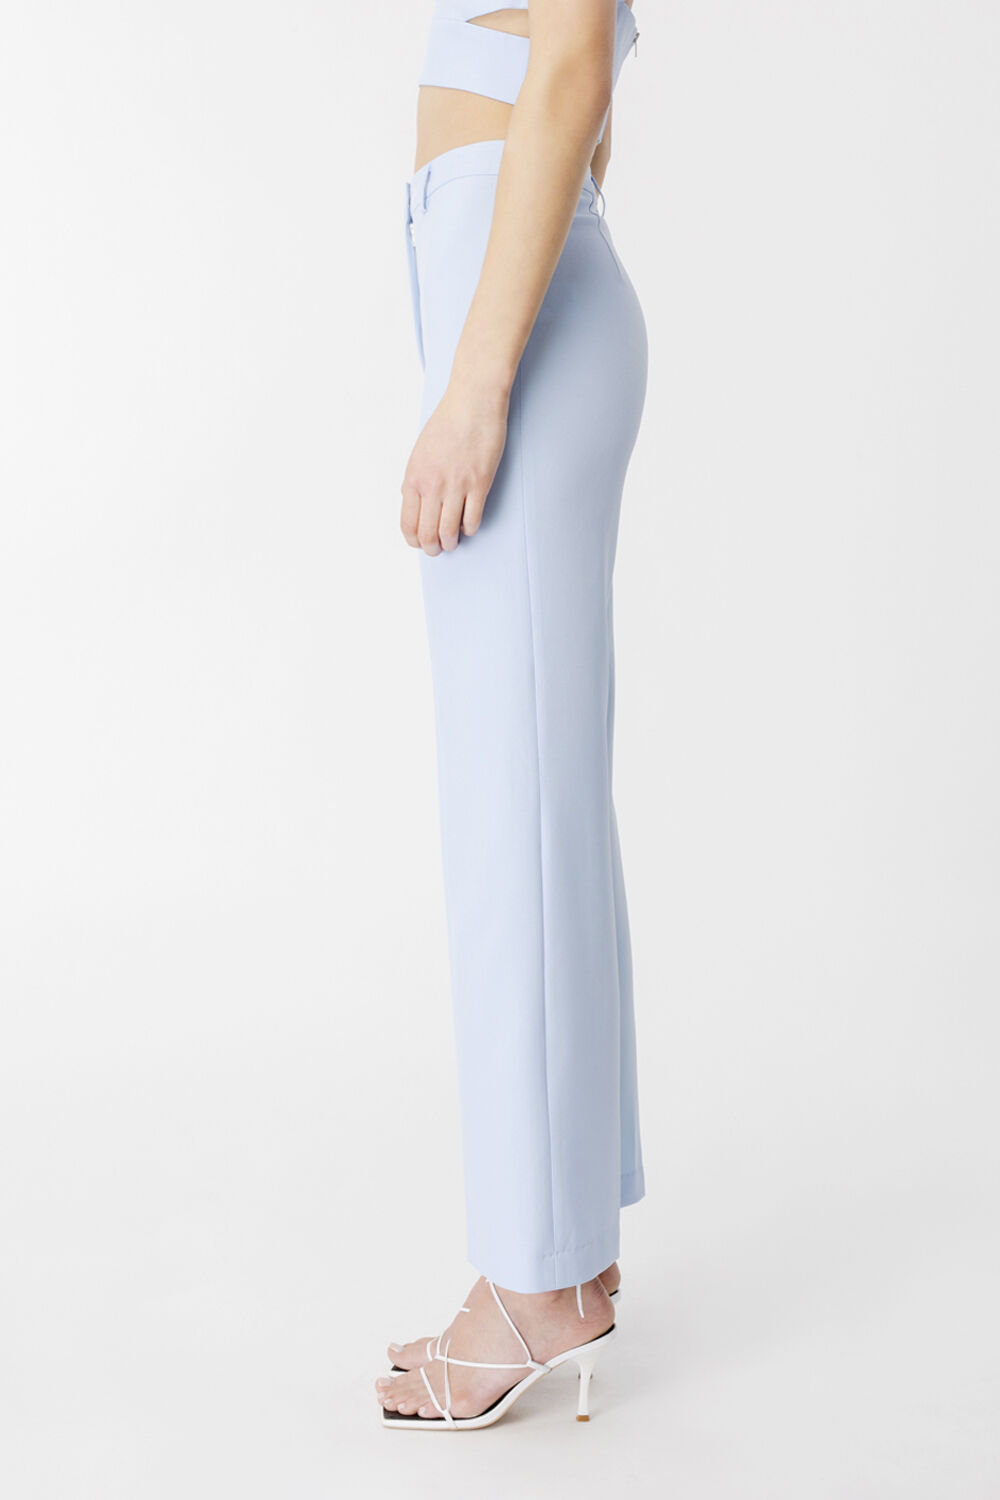 NORTH HIGH RISE PANT in colour MOONLIGHT BLUE